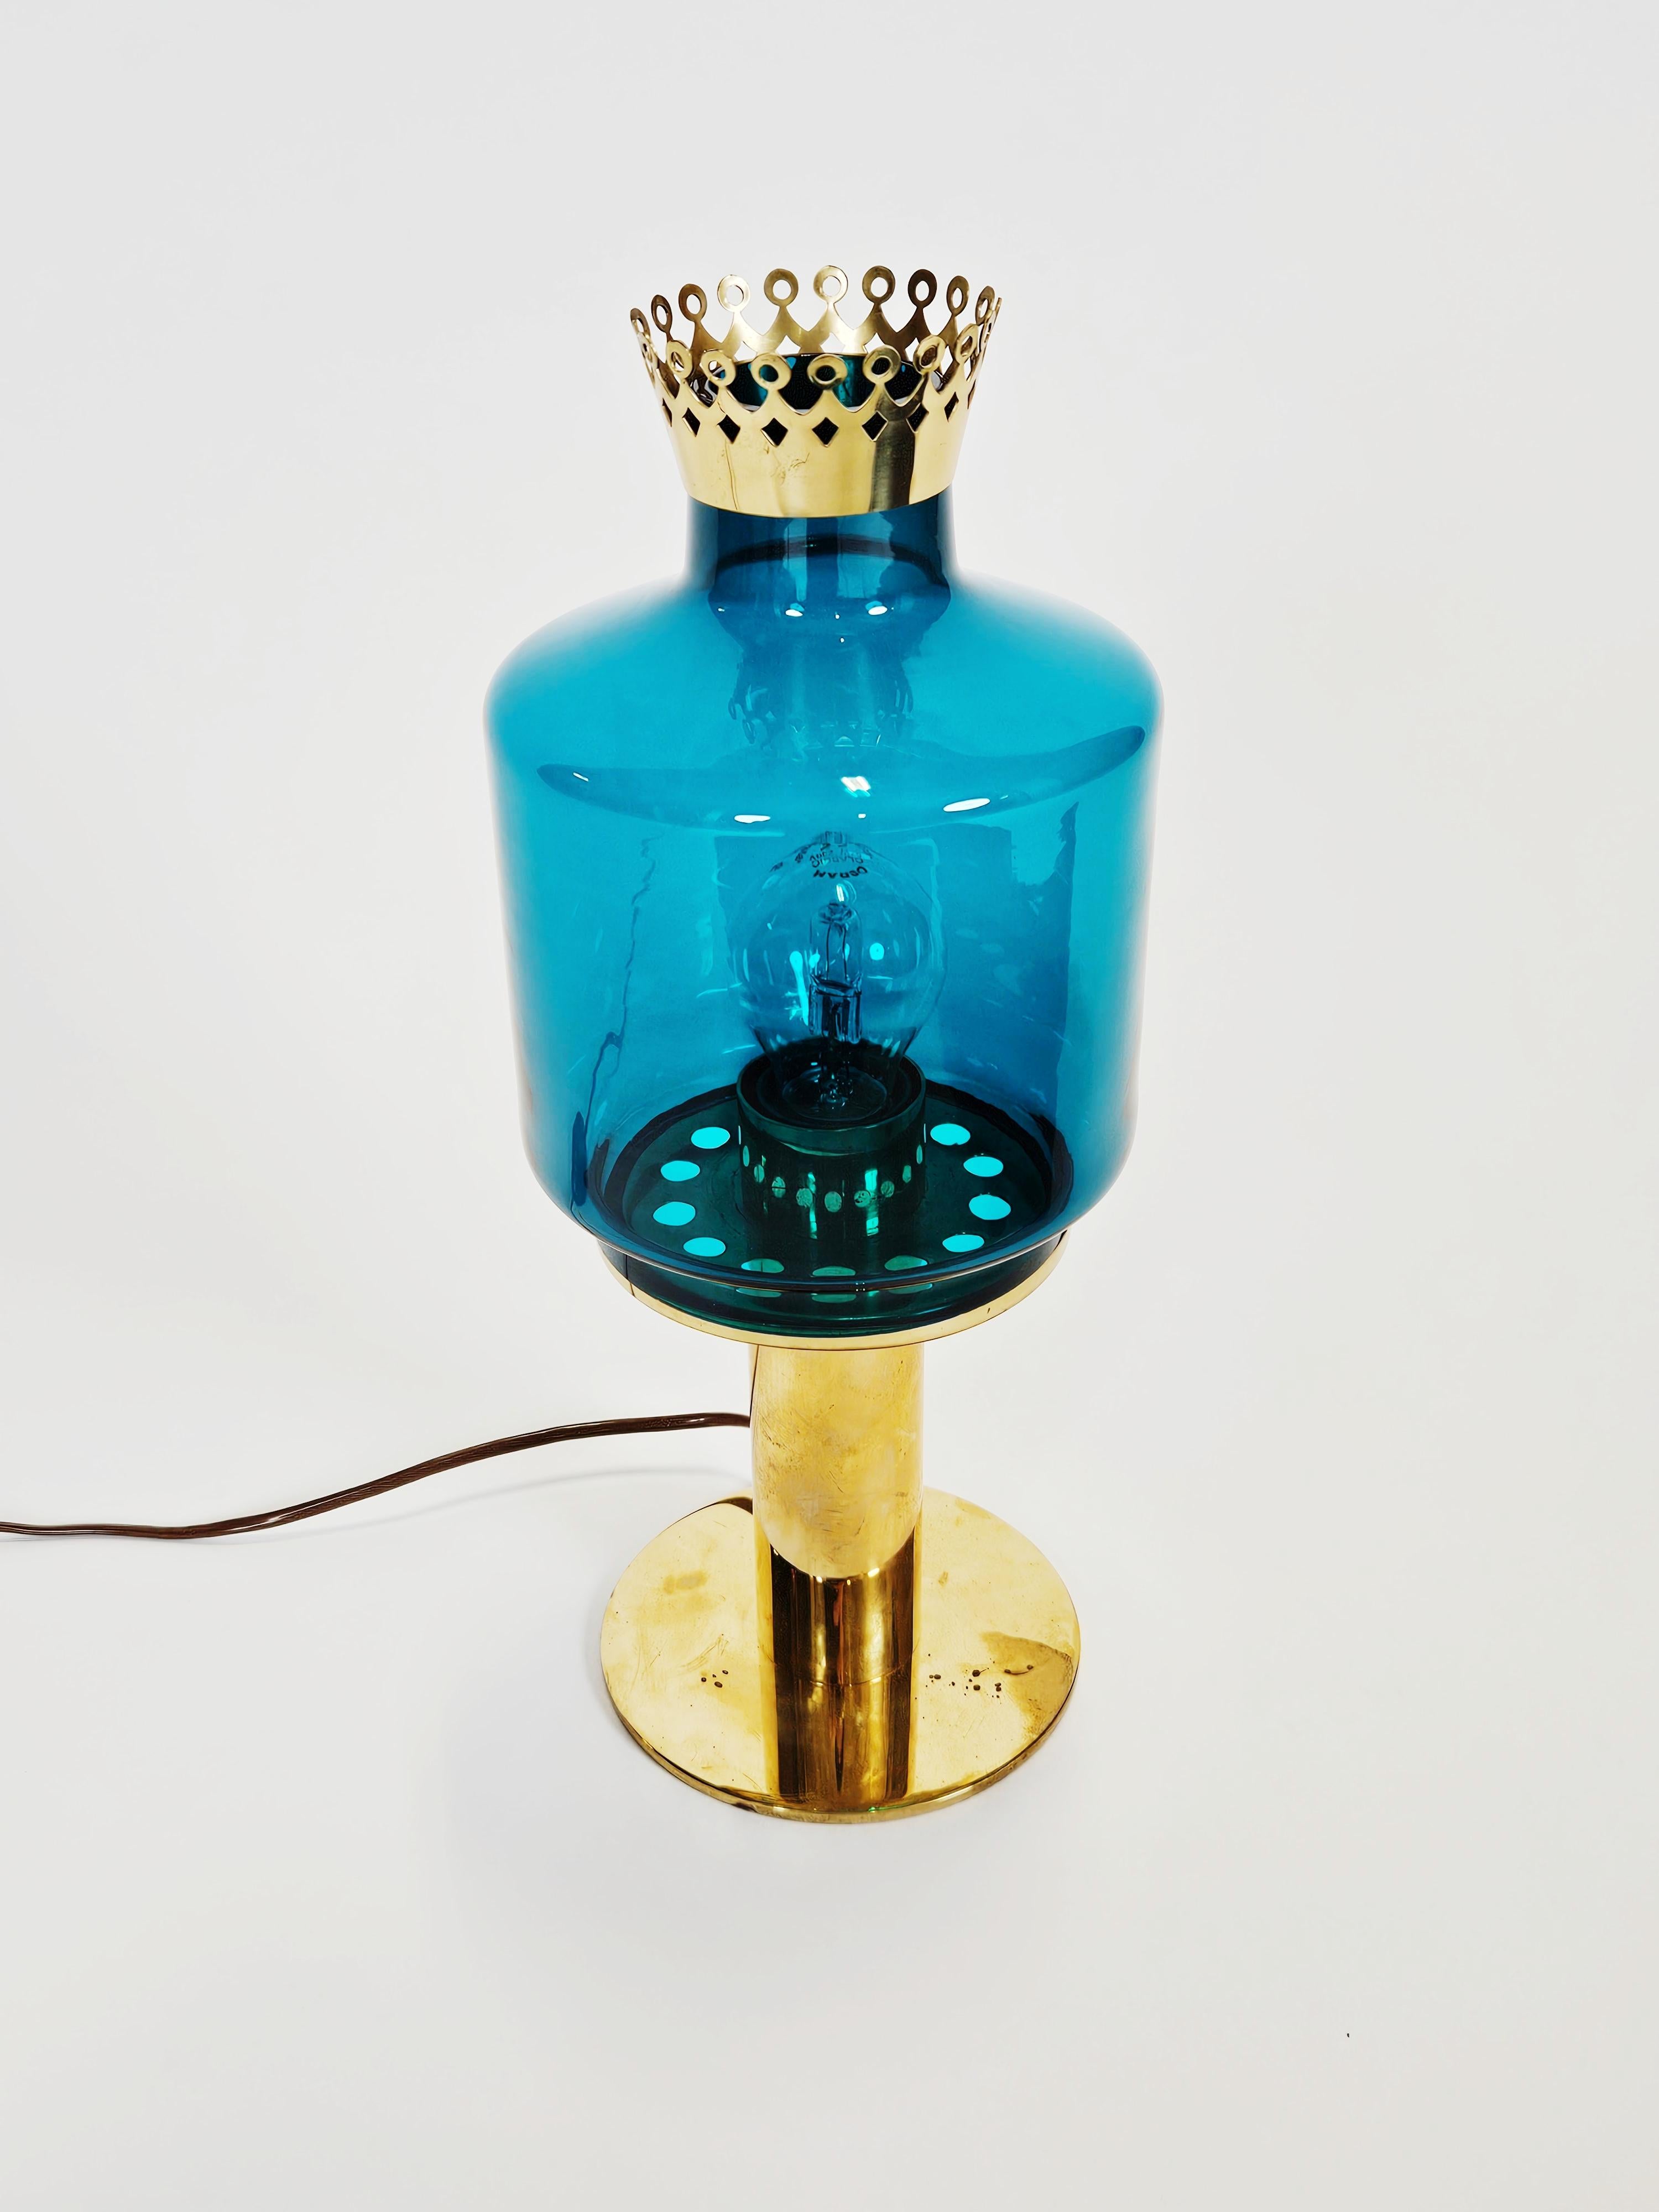 Rare table lamp model B-102 designed by Hans-Agne Jakobsson. Produced by Hans-Agne Jakobsson AB in Markaryd, Sweden.

Beautiful patinated brass and blue glass.